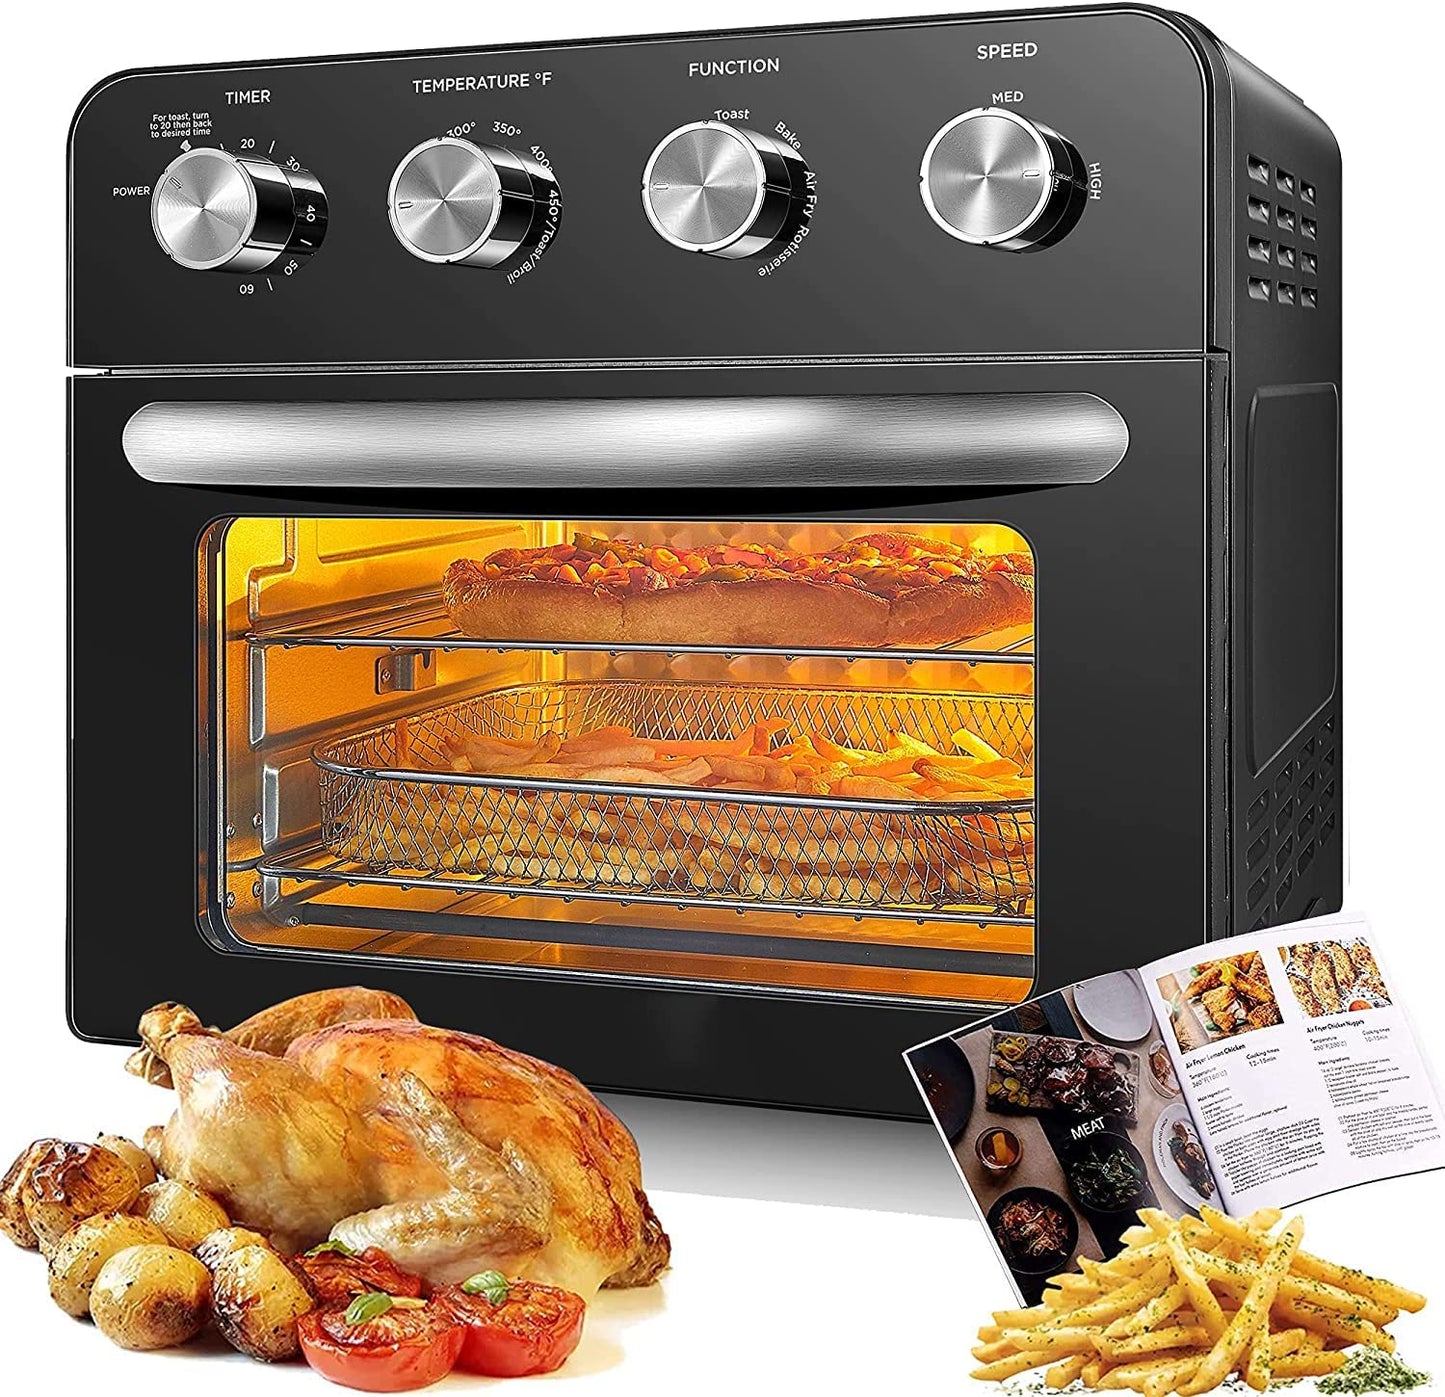 FOHERE Air Fryer Oven Combo, 6 Slice 24 QT Multi-function Convection Oven, 1700W Toaster Oven for Rotisserie, Dehydrate, Air Fry, Bake & Reheat, Fry Oil-Free, Non-Stick Inner, 6 Accessories & 100 Recipes